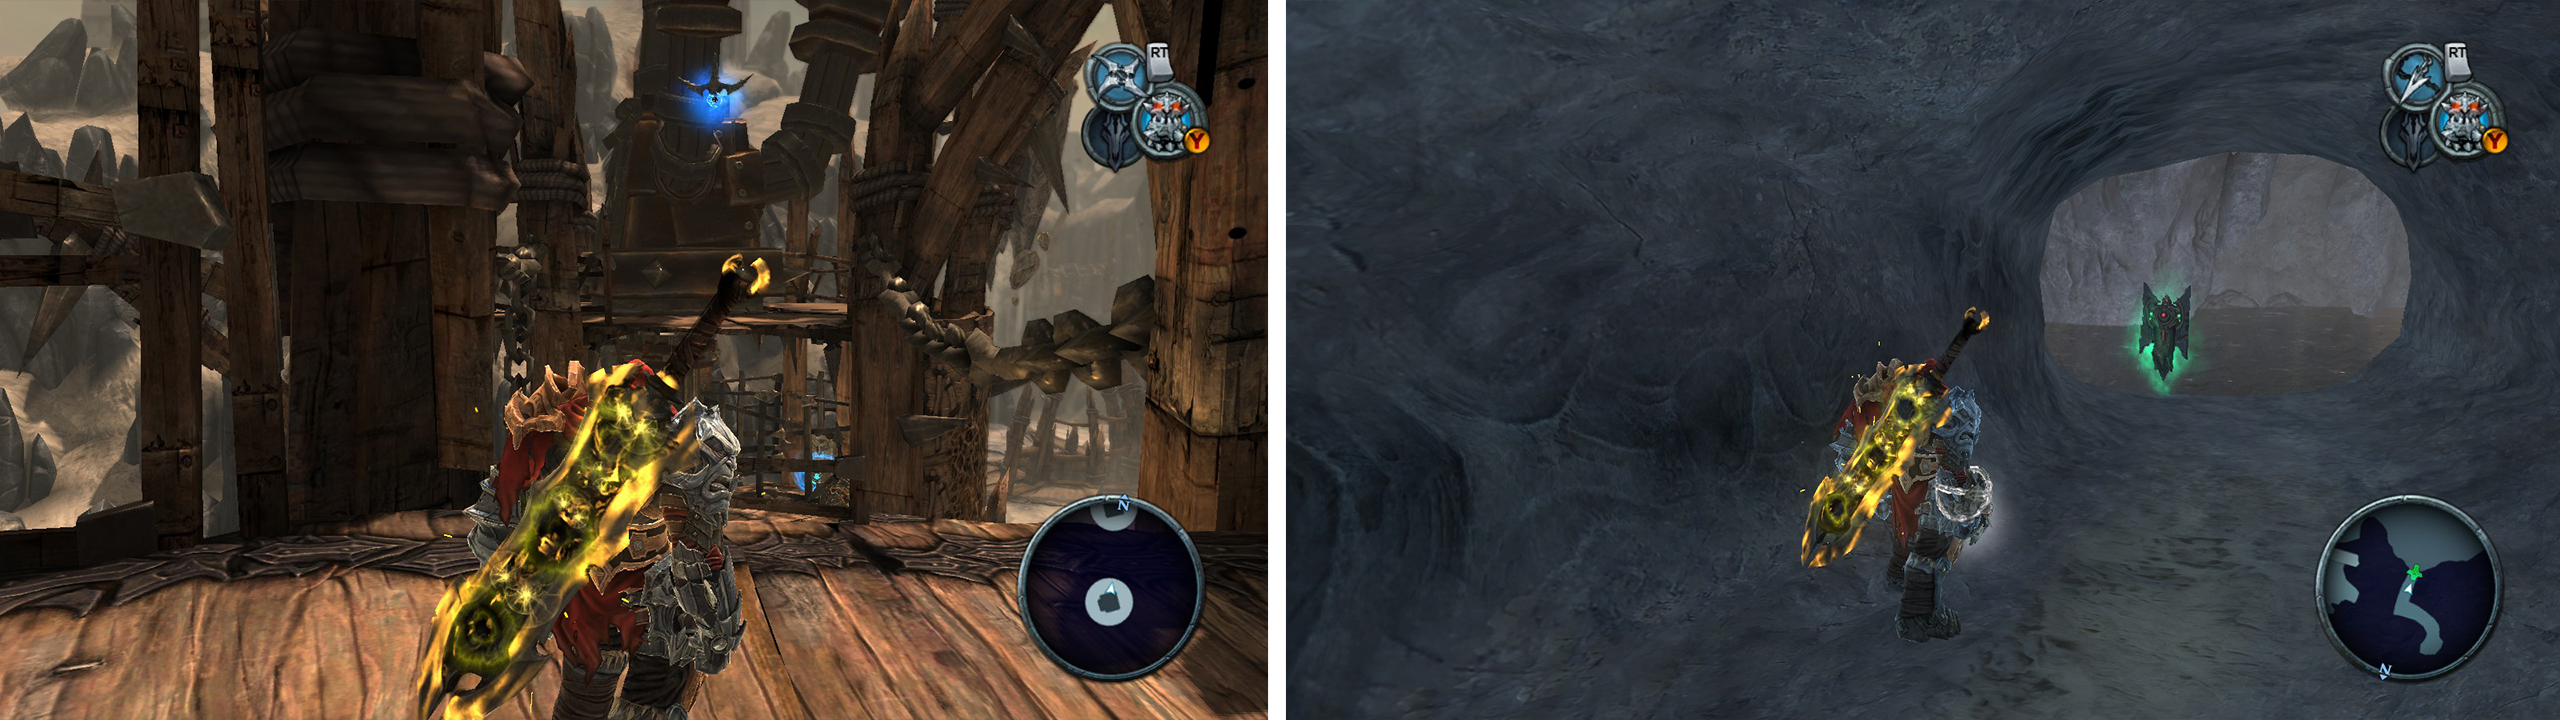 Use the Abyssal chain to swing to the adjacent rooftop (left). Activate the switch and drop down into the hole that is revealed to find the Artefact (right).